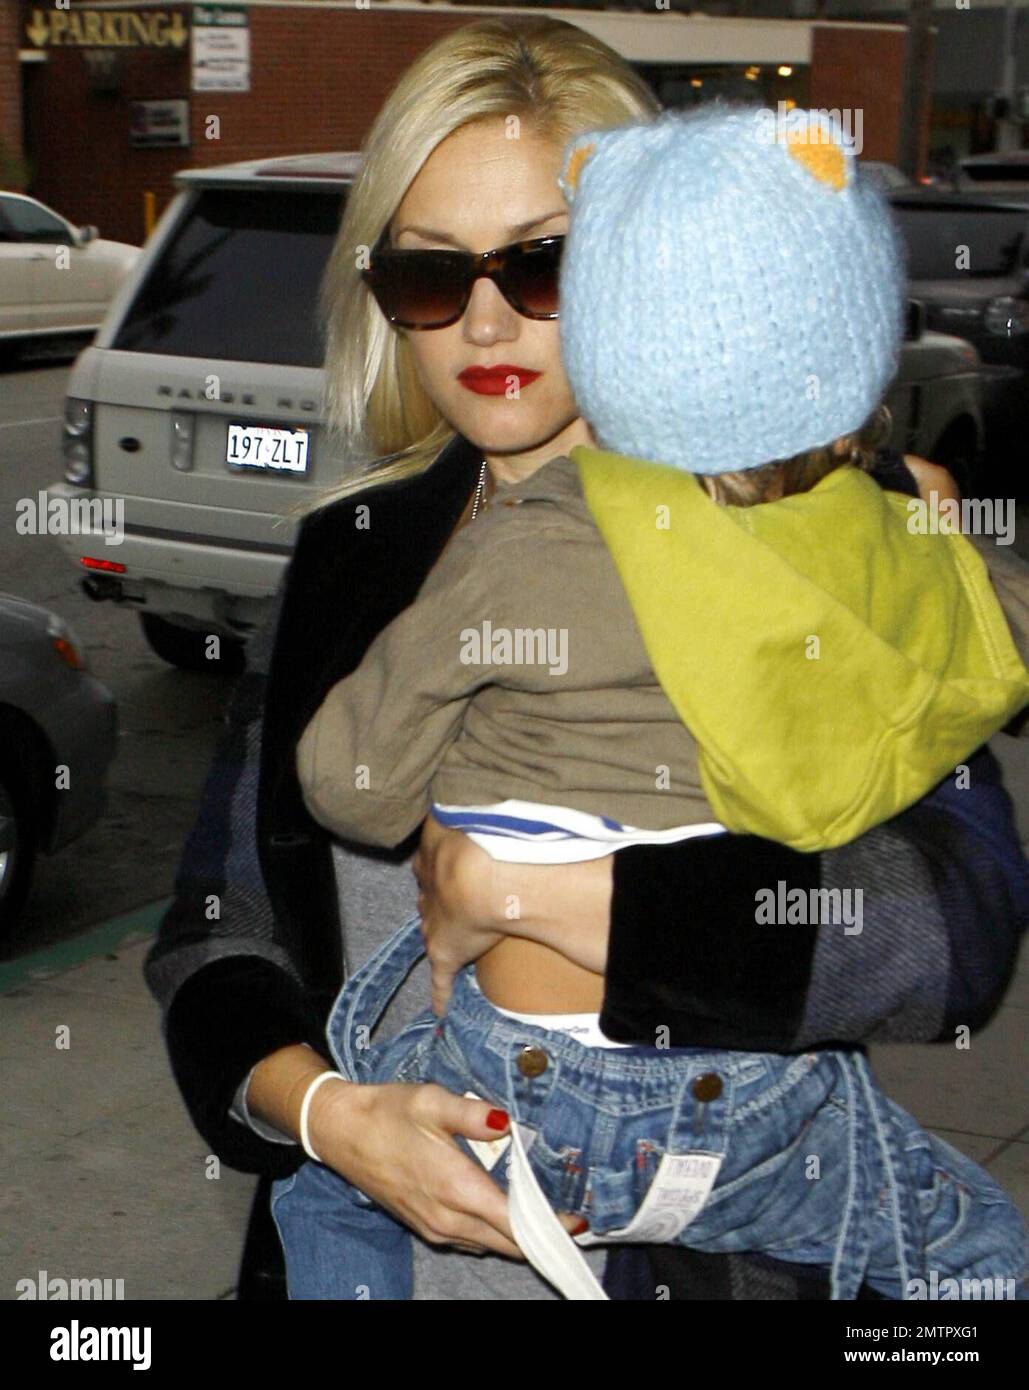 The work never ends for doting mom Gwen Stefani. She toted her two sons, Zuma, 3 months, and Kingston, 2, to the doctor today and stopped in at a pharmacy afterwards, clutching a small prescription bag as she left. Now that baby Zuma is getting older, Stefani is making plans to head back to work. Gwen's group, No Doubt, announced on its Website recently that they'll be touring in 2009 in support of their first new album in seven years. Meanwhile, reports are that Stefani is 'annoyed' that husband Gavin included a duet, 'Some Days,' the two recorded for fun on his new album 'Wanderlust.' Los An Stock Photo